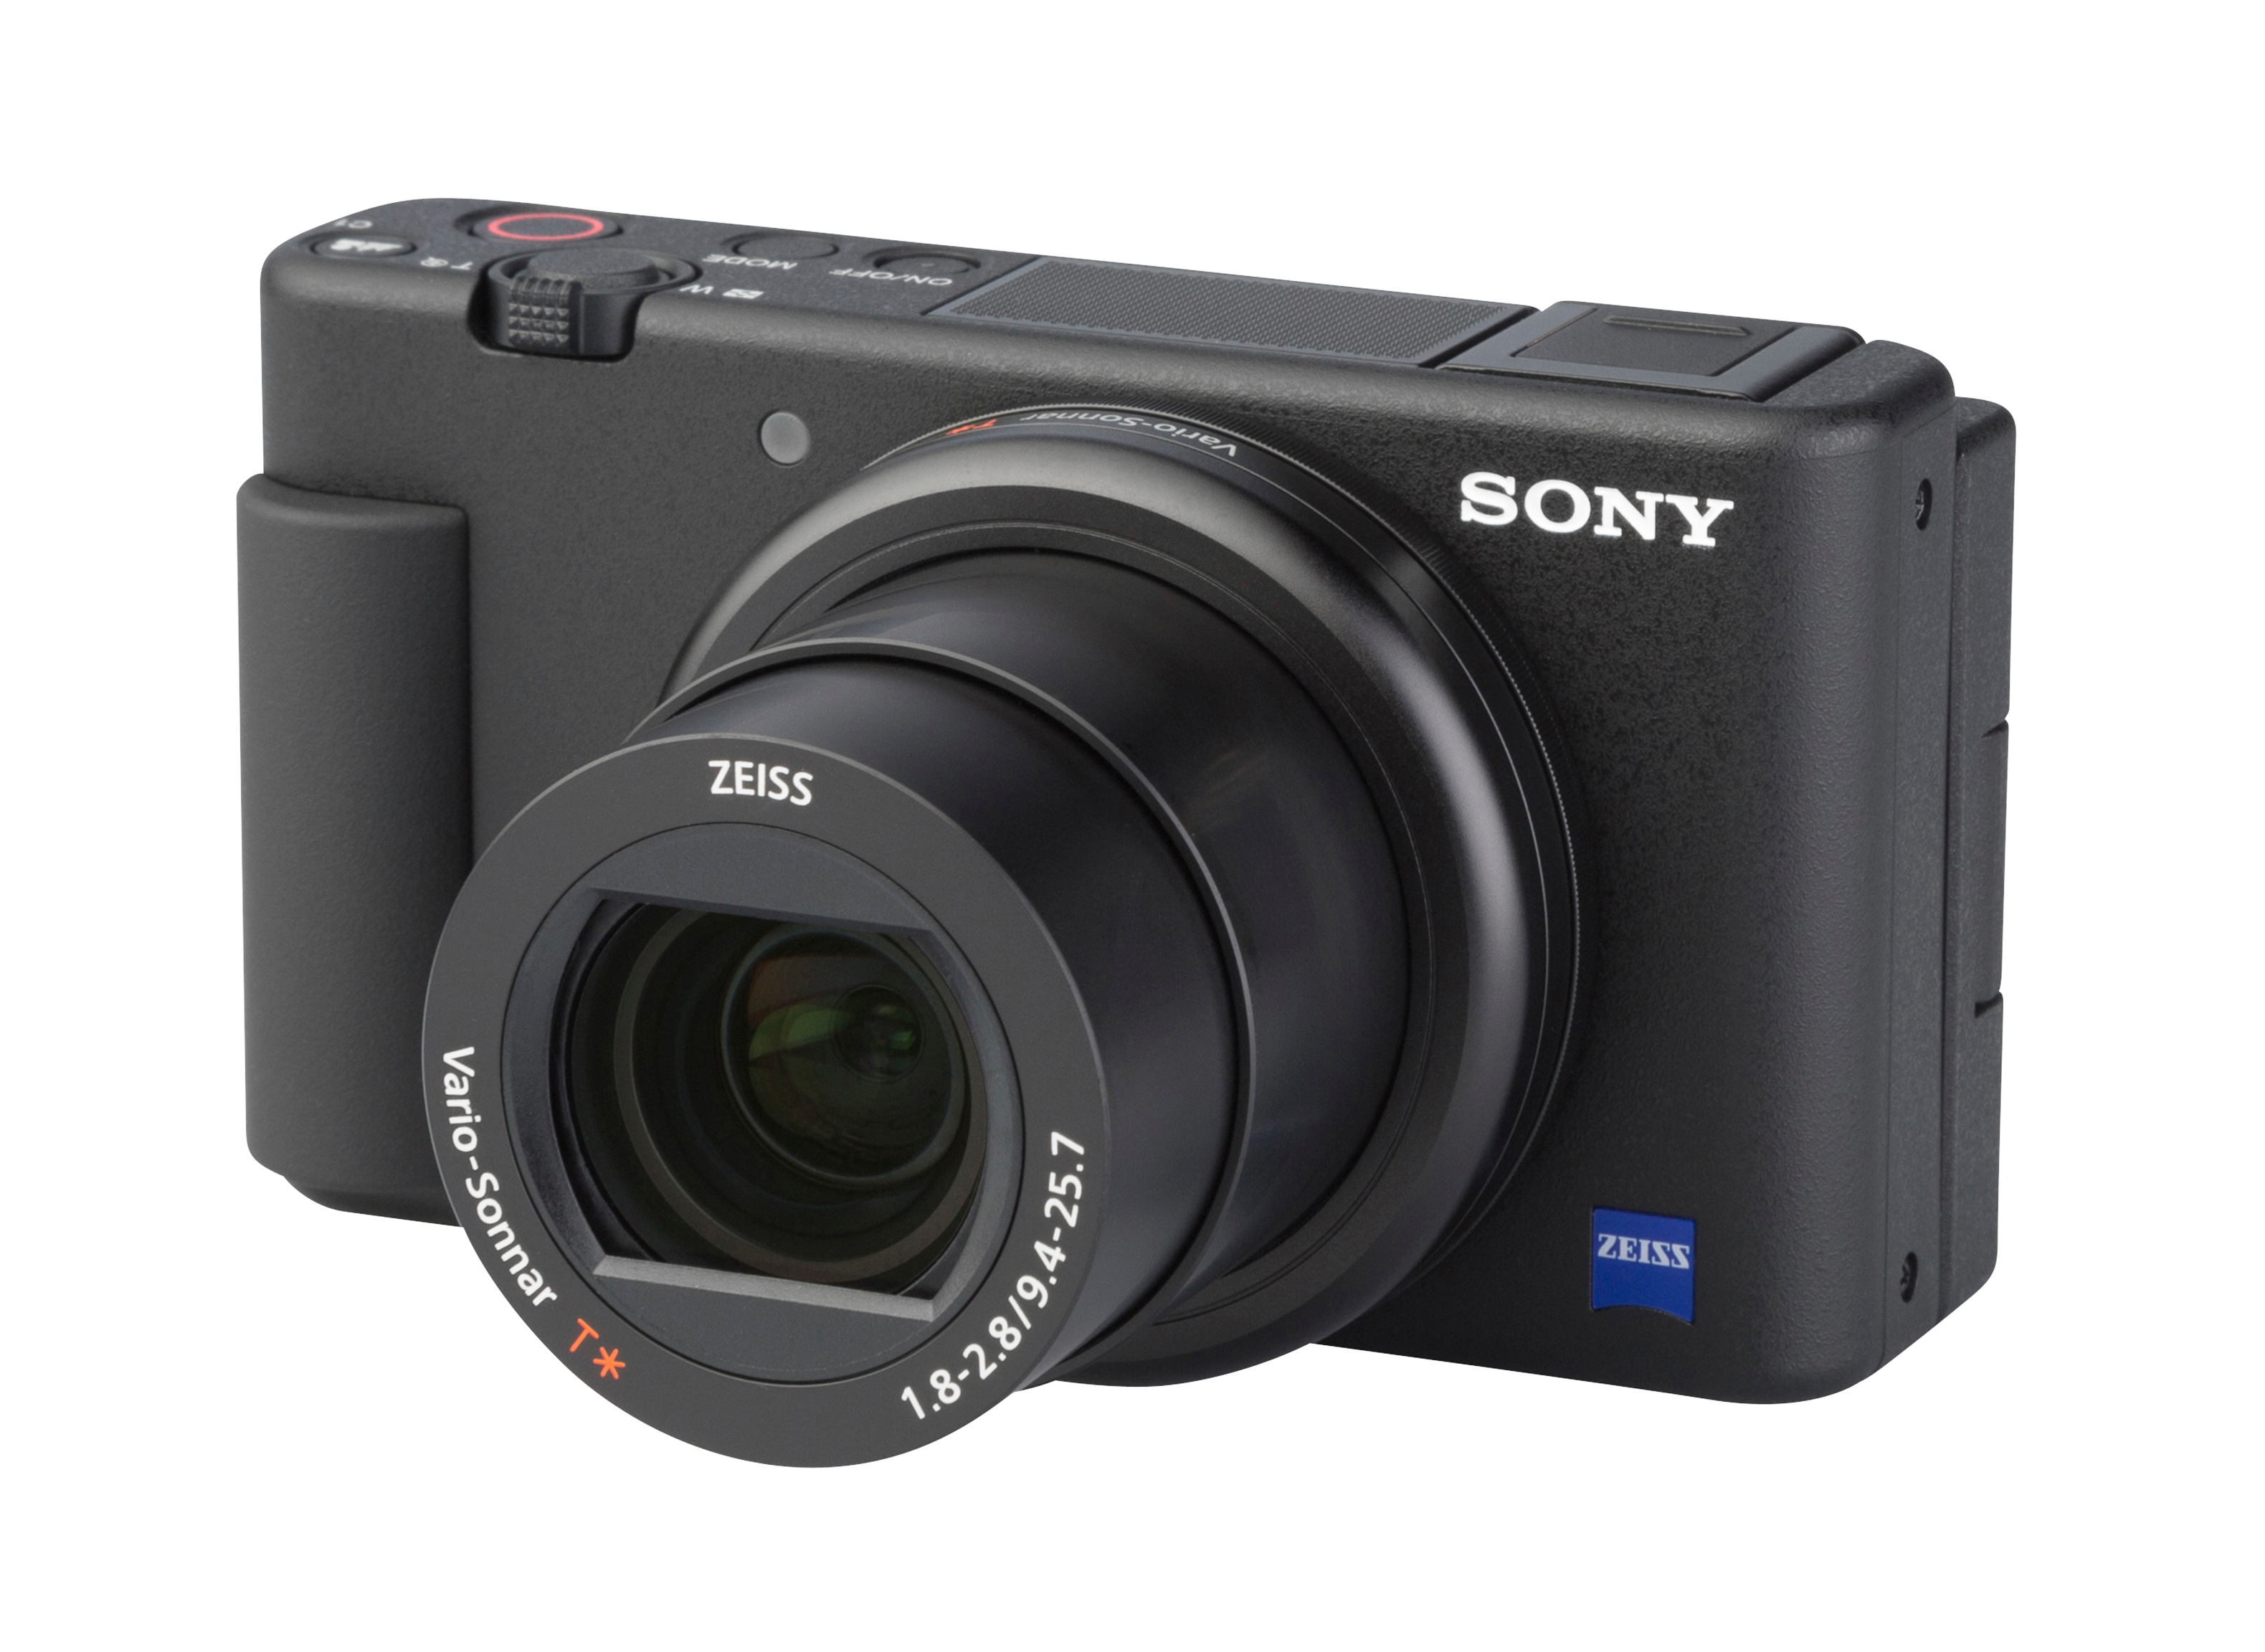 Sony ZV-1 Camera Review - Consumer Reports